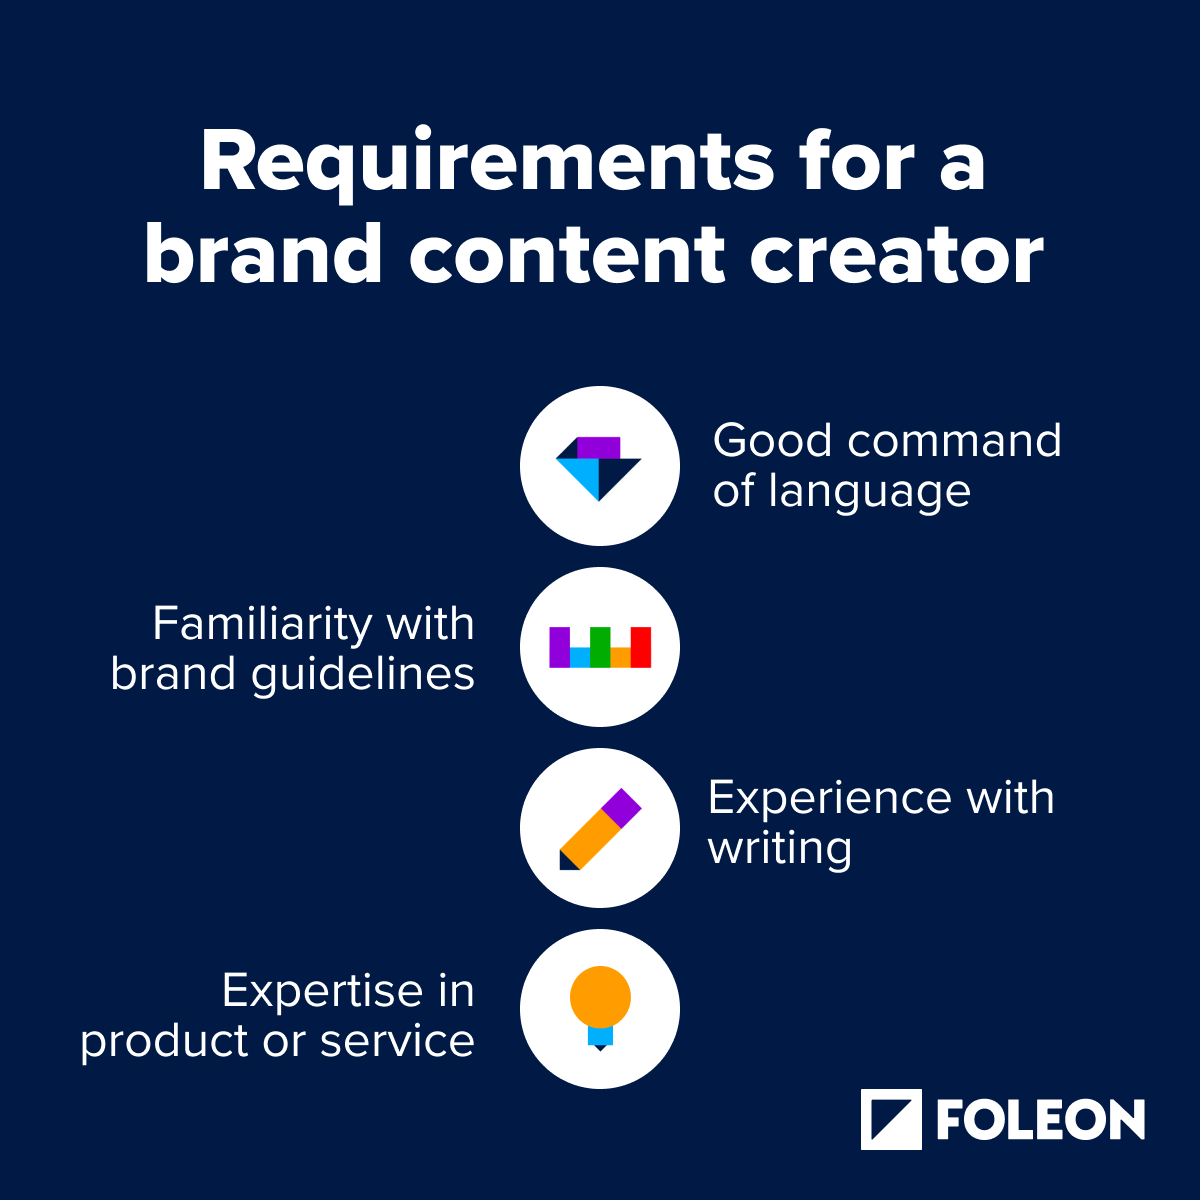 Requirements for a brand content creator